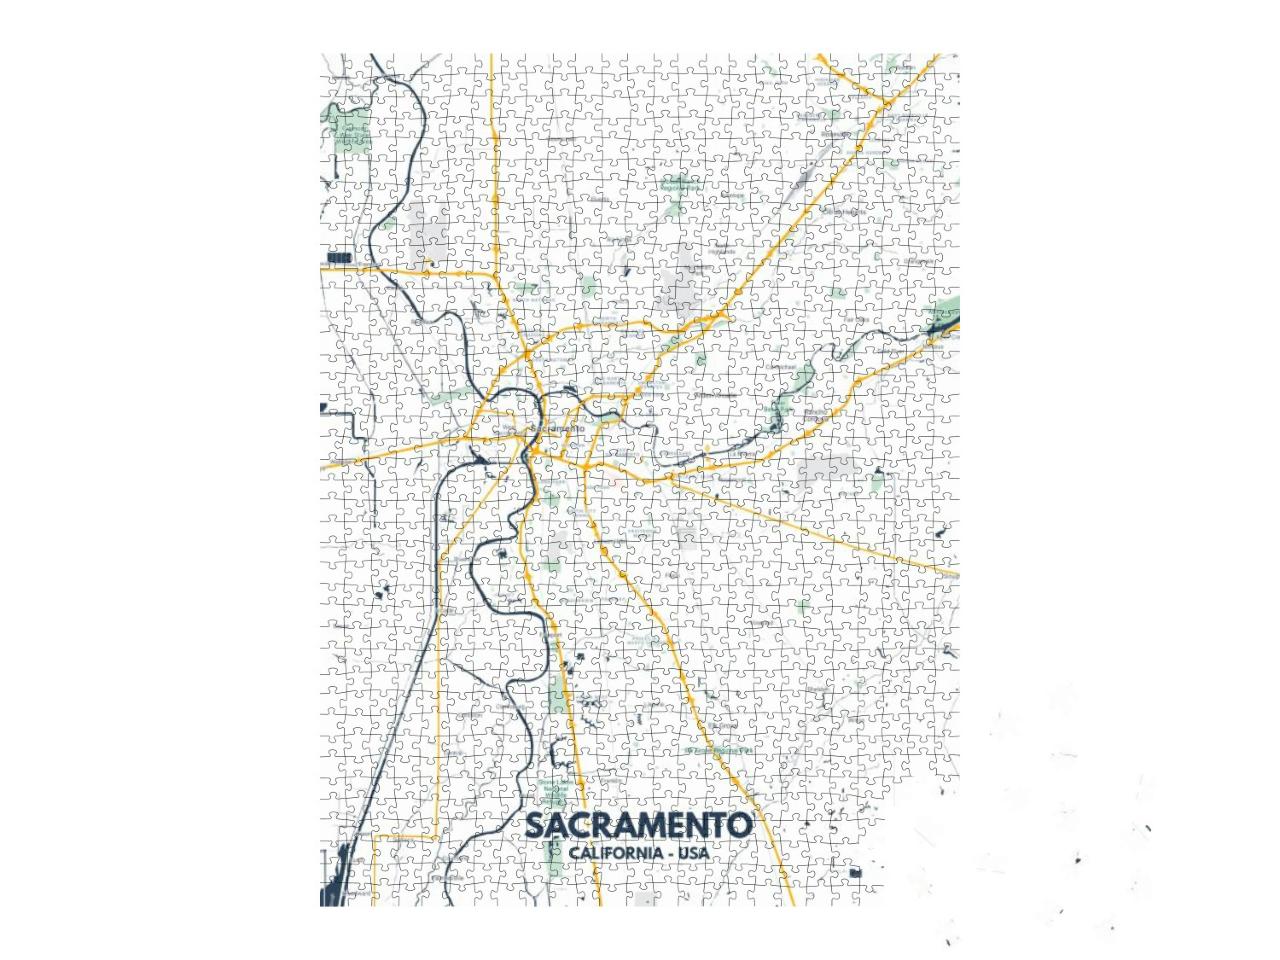 Sacramento - California Map. Sacramento - California Road... Jigsaw Puzzle with 1000 pieces